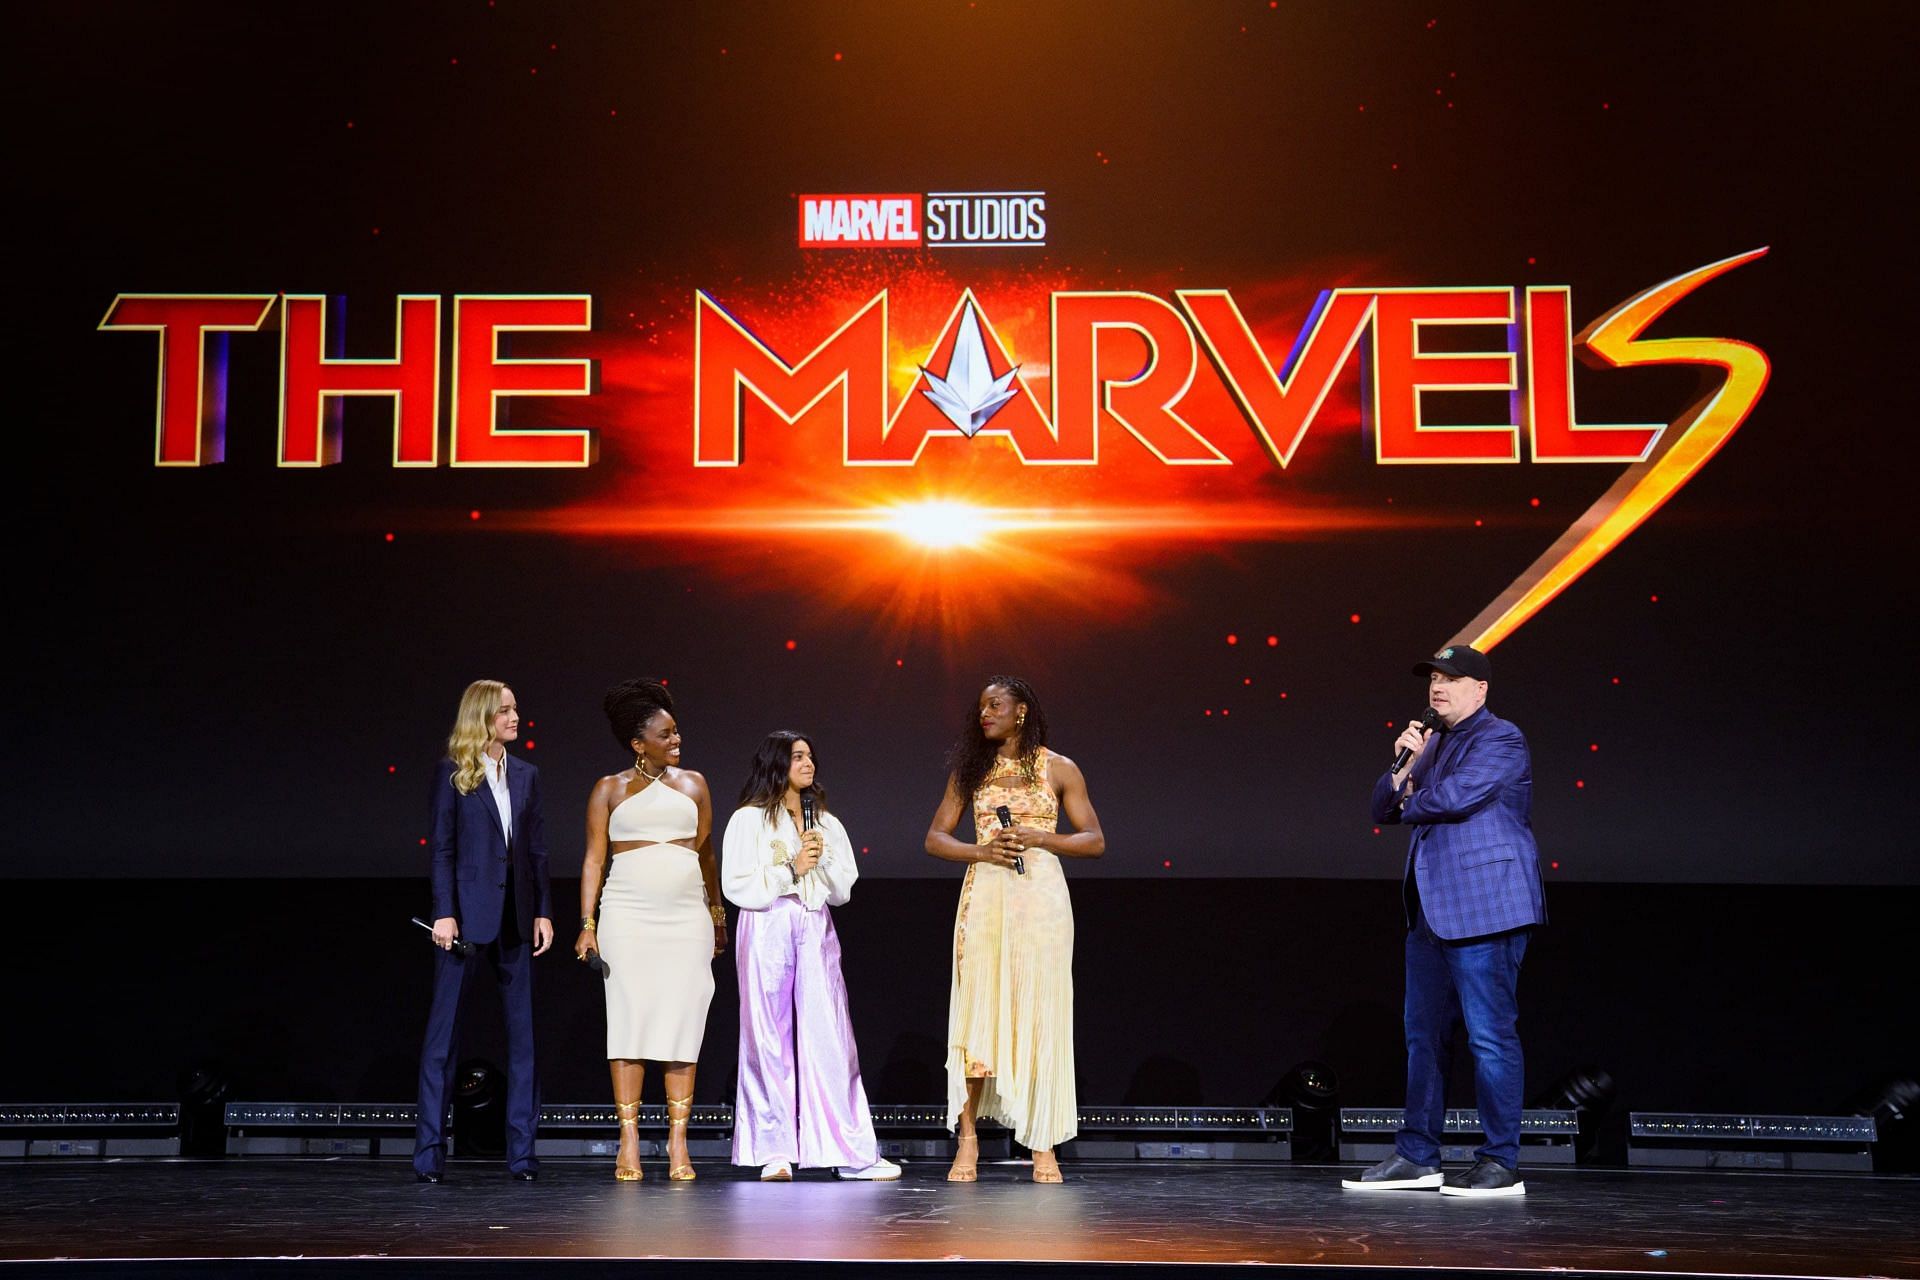 The Marvels is the much-awaited sequel (Image via Marvel)